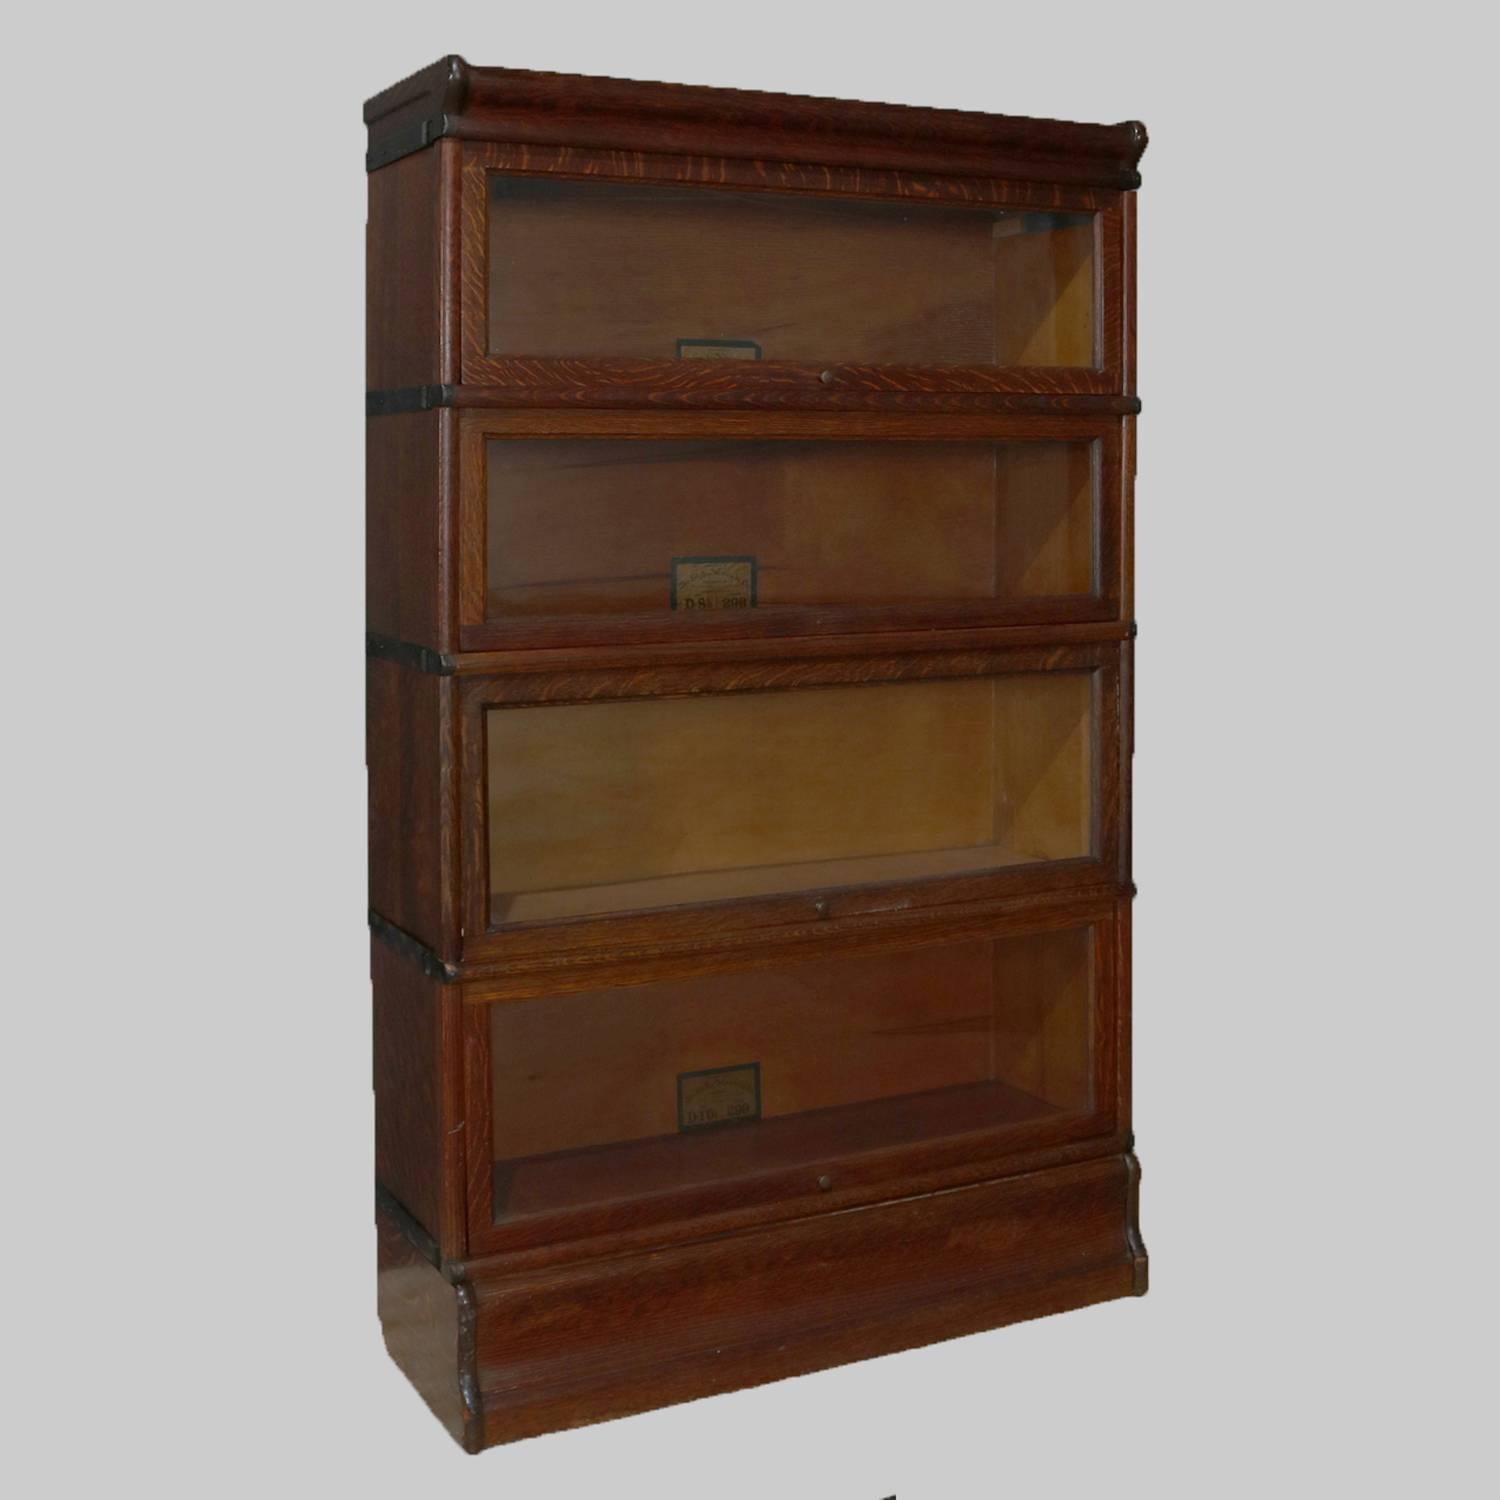 Antique Barrister bookcase by Globe-Wernicke Co. features quarter sawn oak construction with four stacks and pull-out glass doors, original labels, most frequently seen in the legal profession and law offices, circa 1910.

Measures - 56